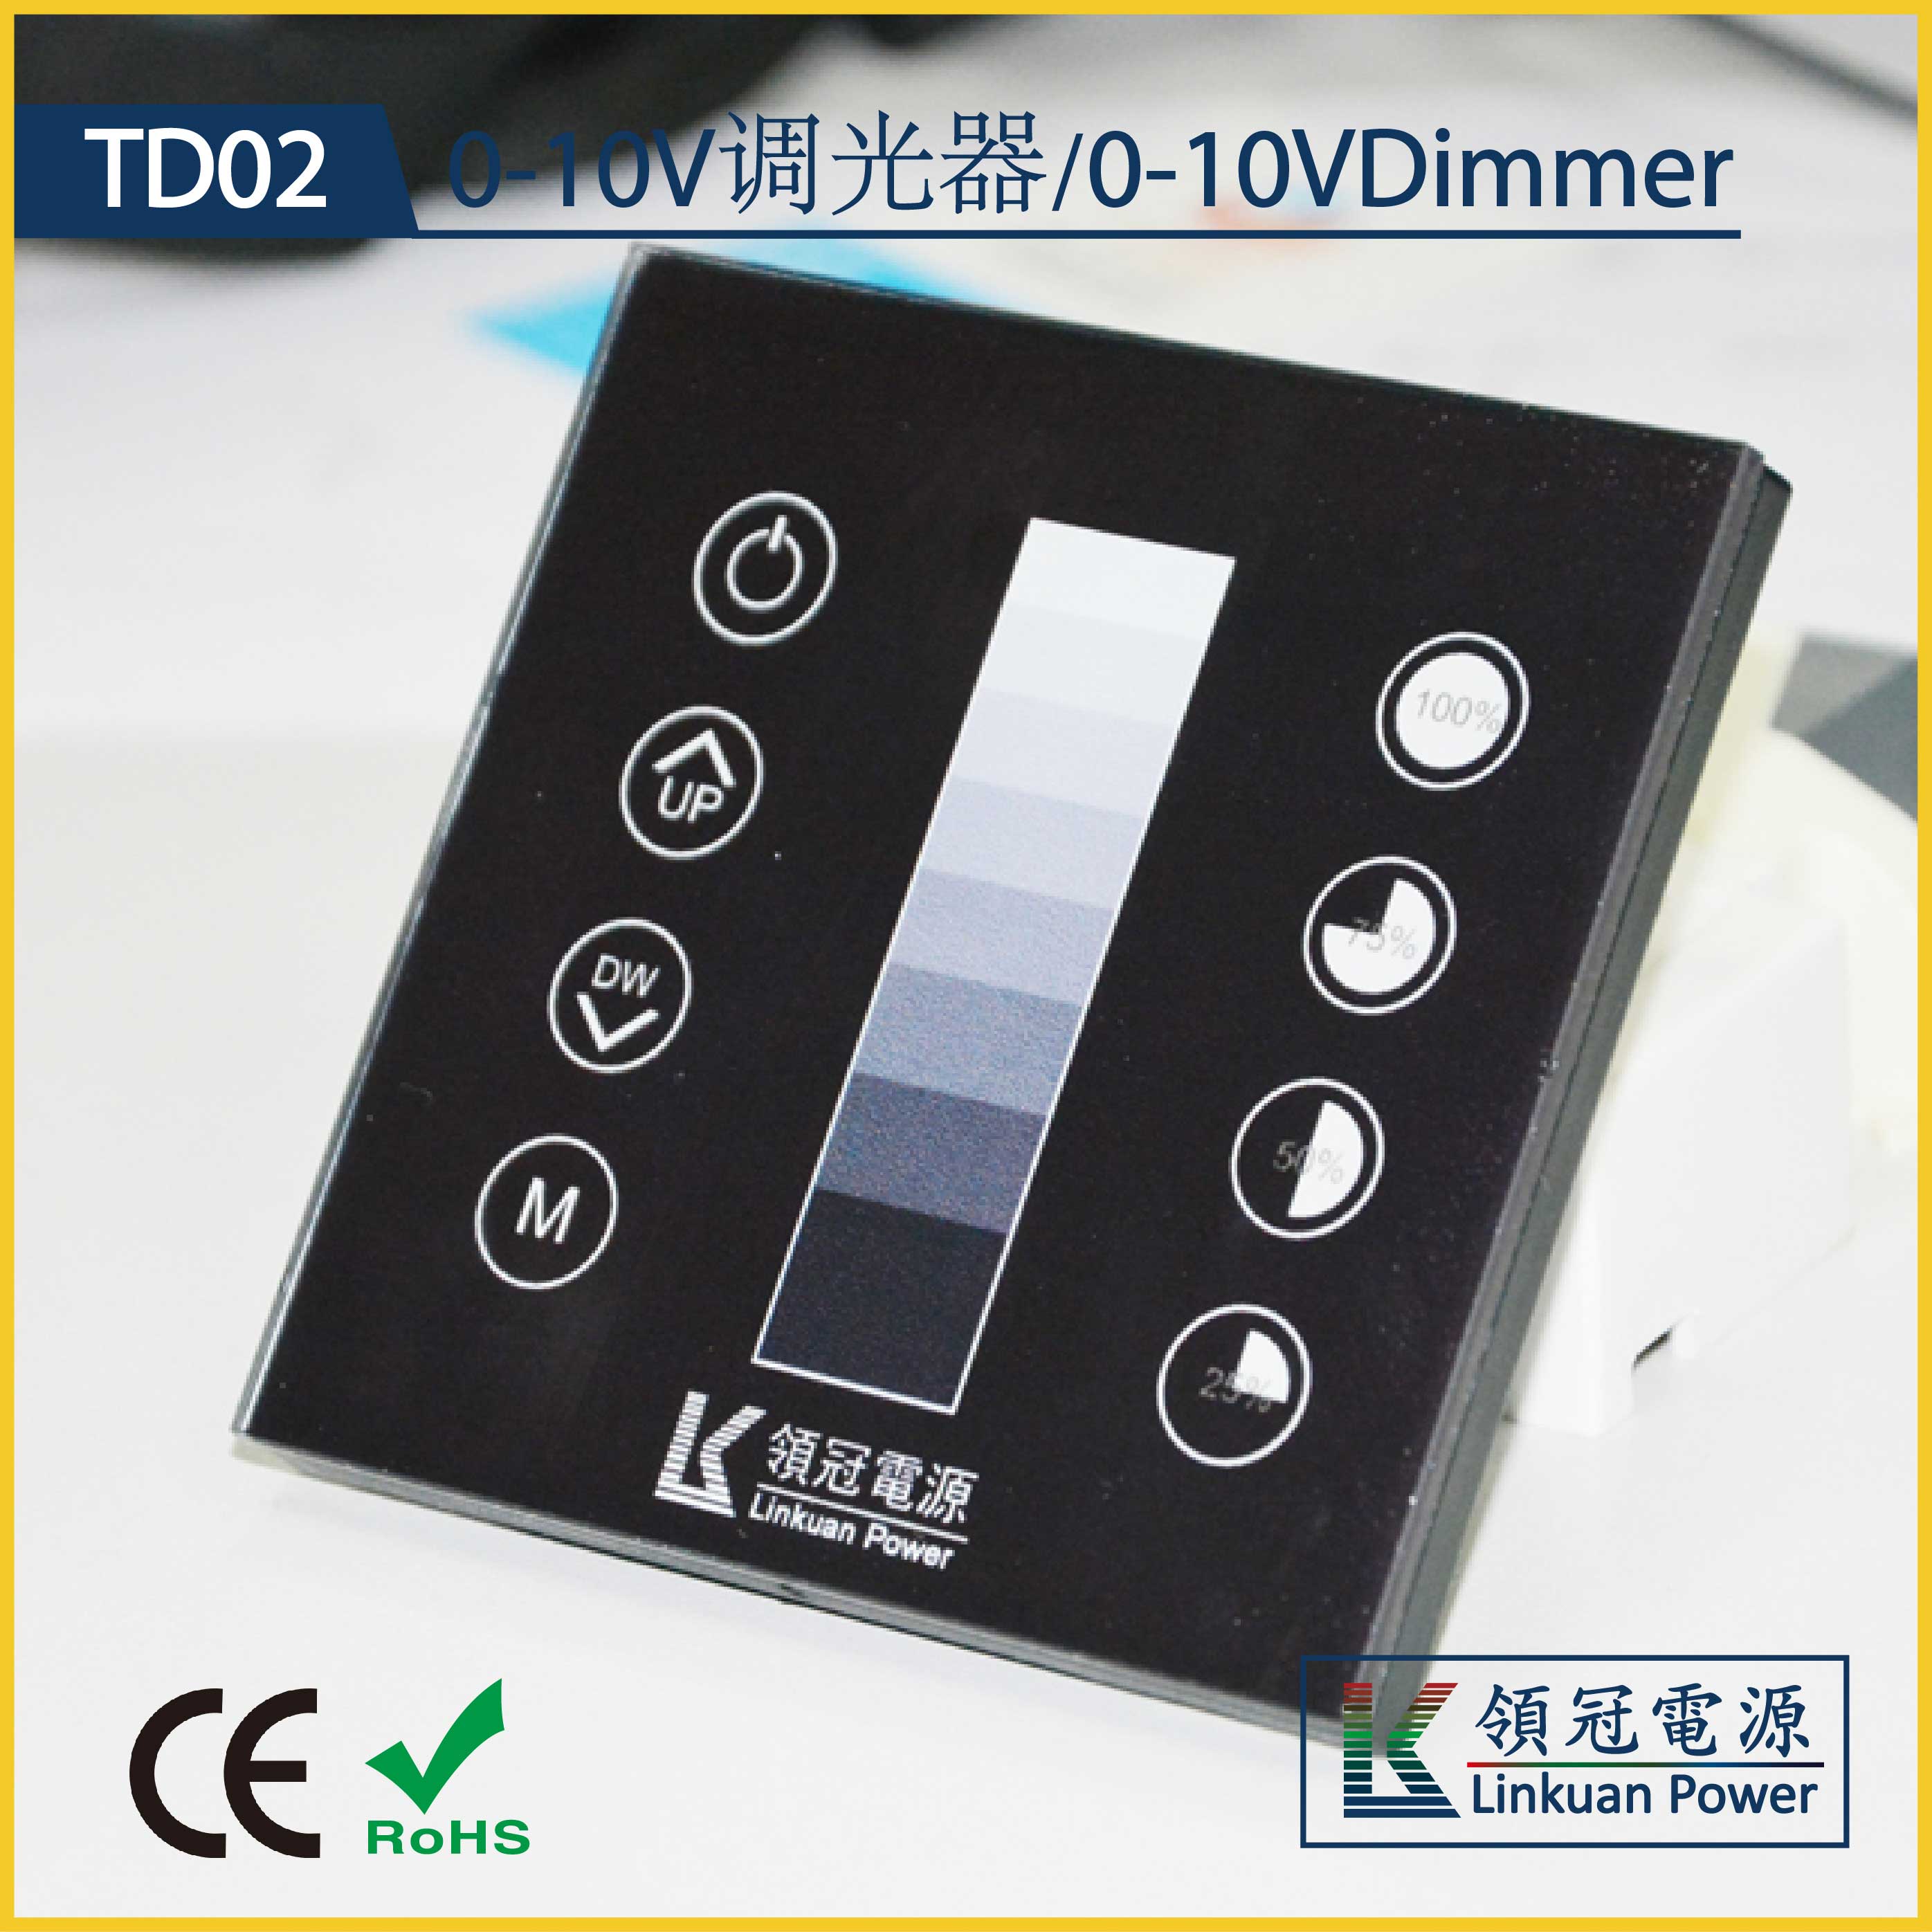 TD02 Touch Switch 0-10V Dimmer